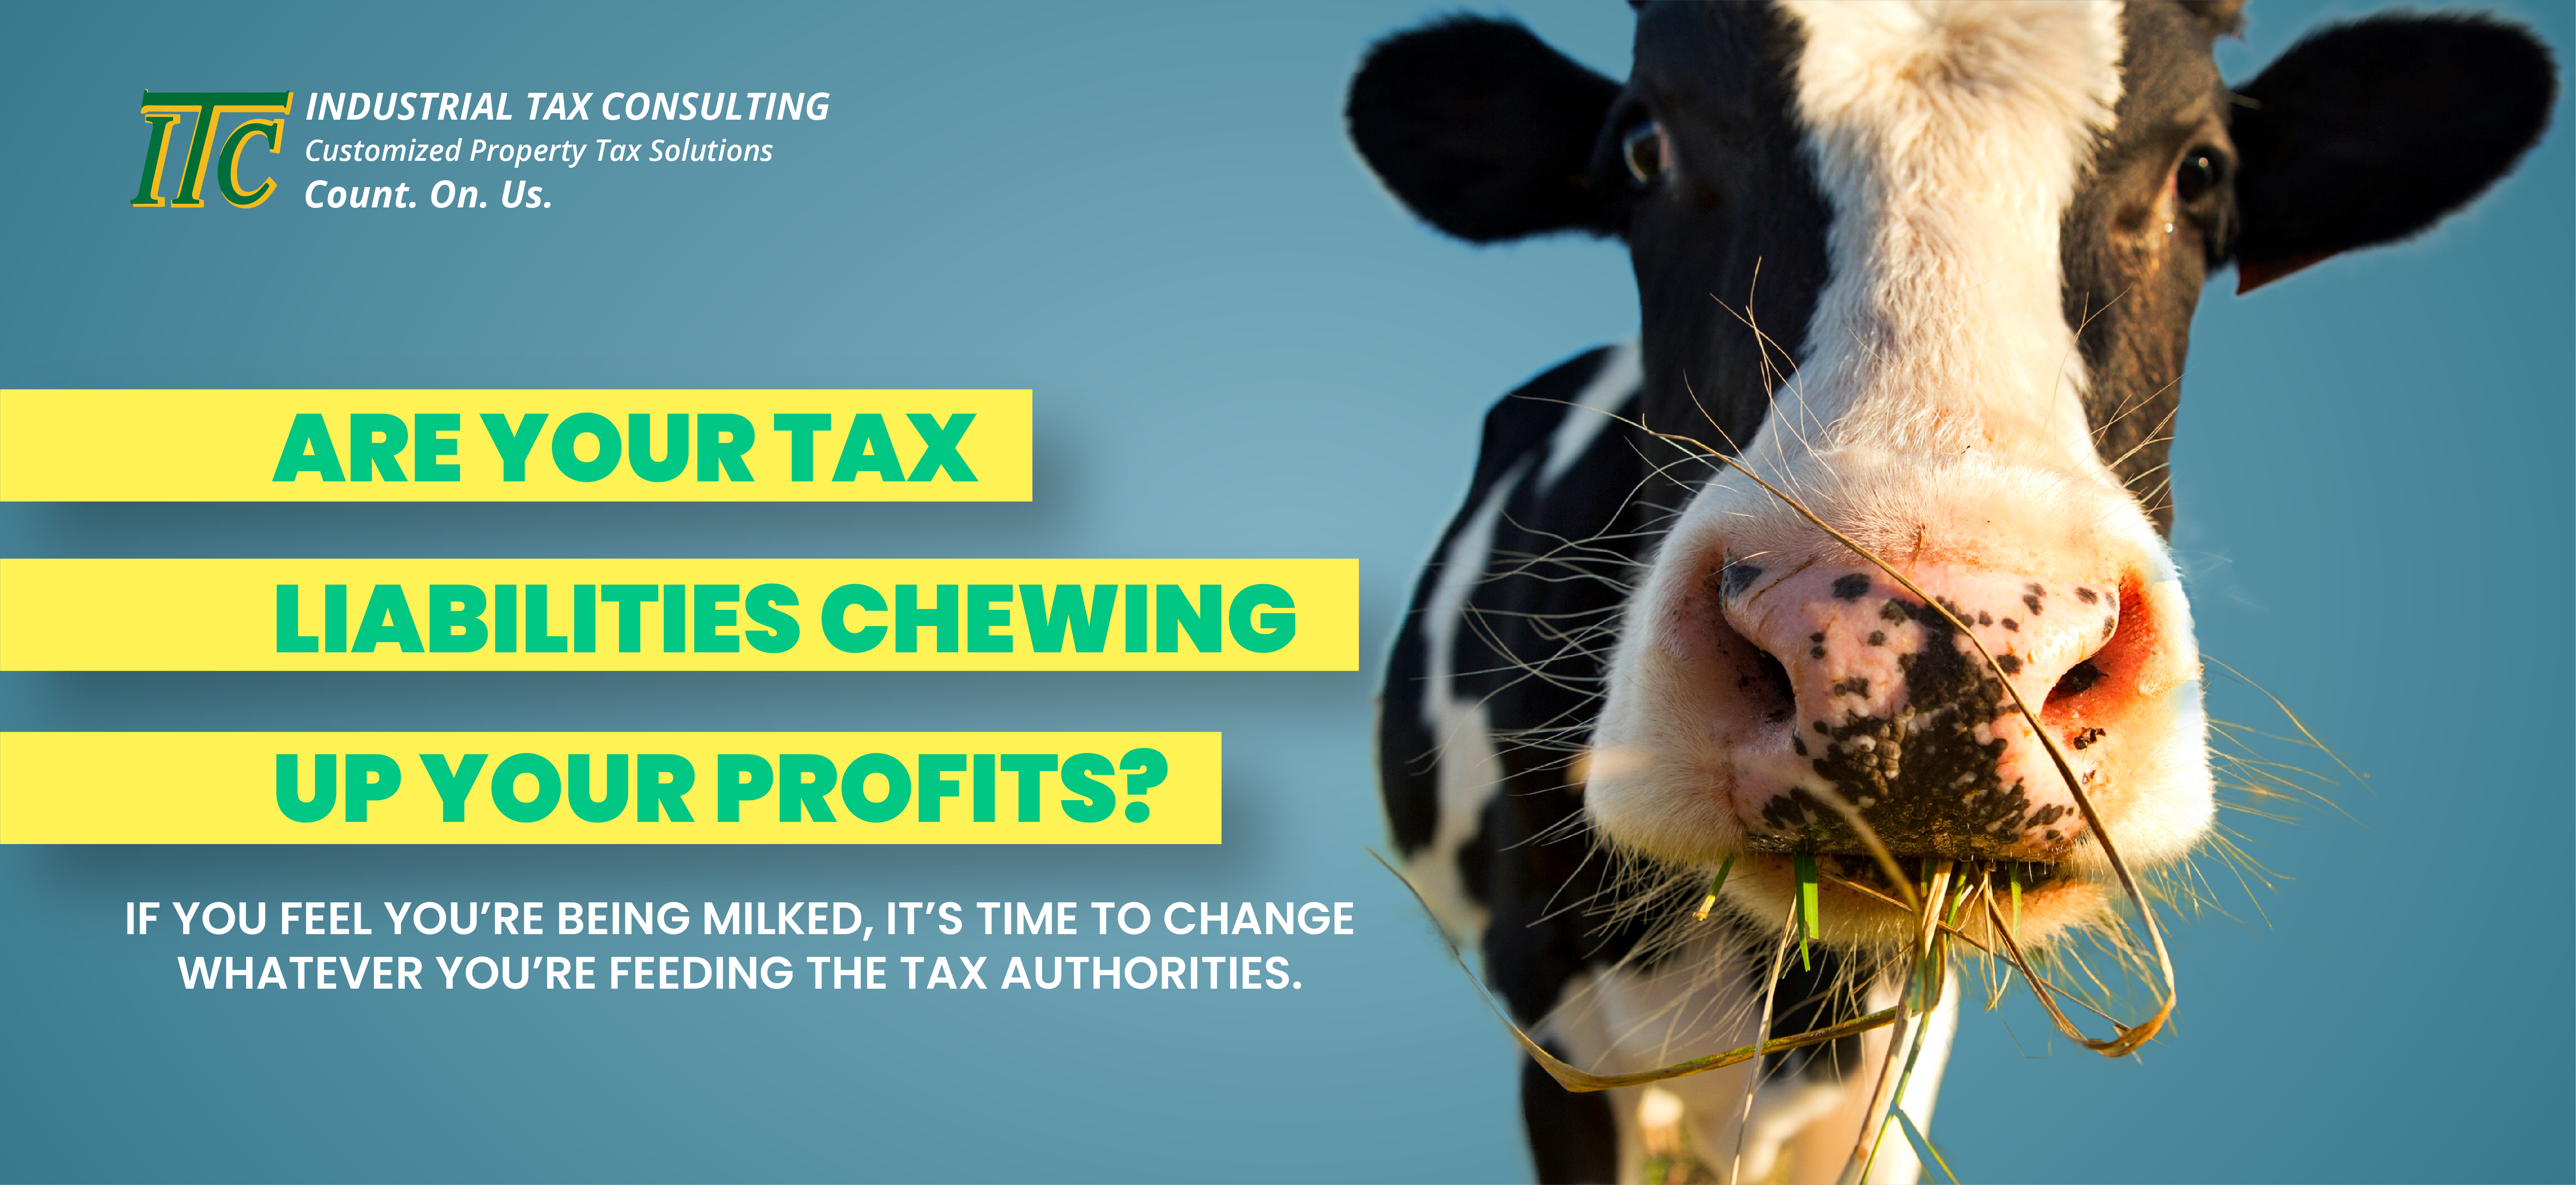 ITC Cow ad for Tax Liabilities